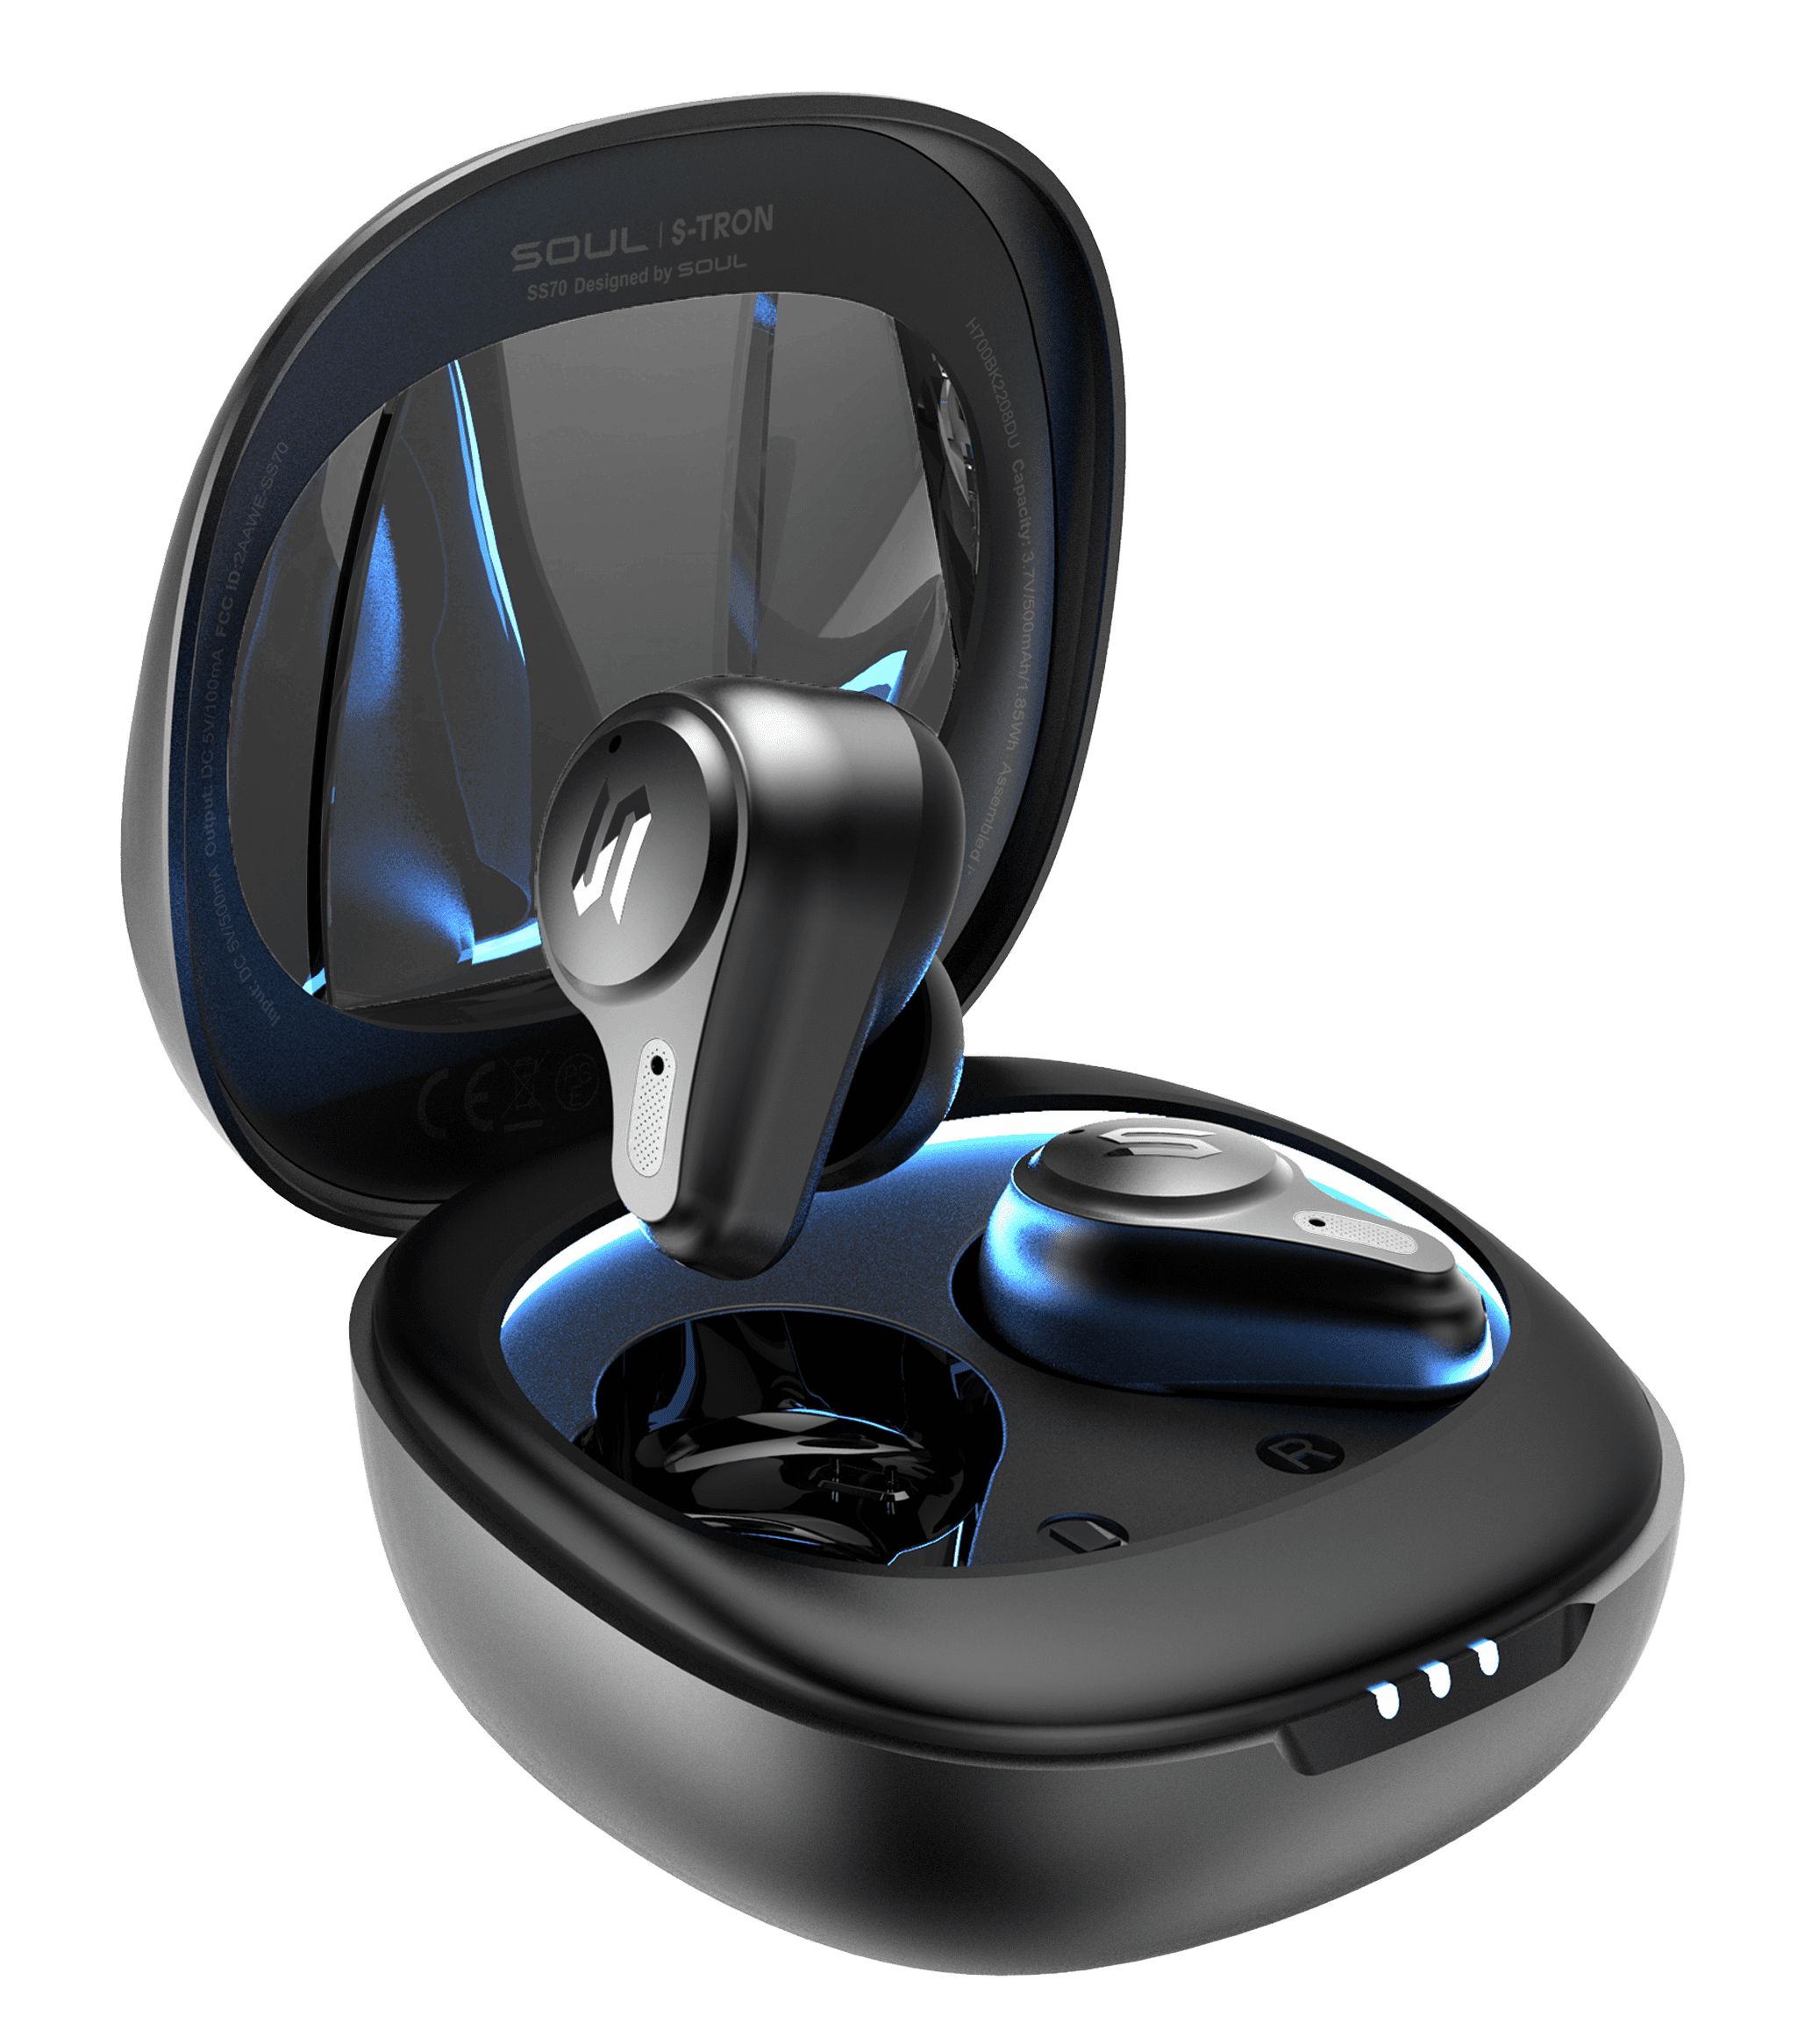 SOUL S-Tron True Wireless Earbuds with LED Light Ring (BLACK)